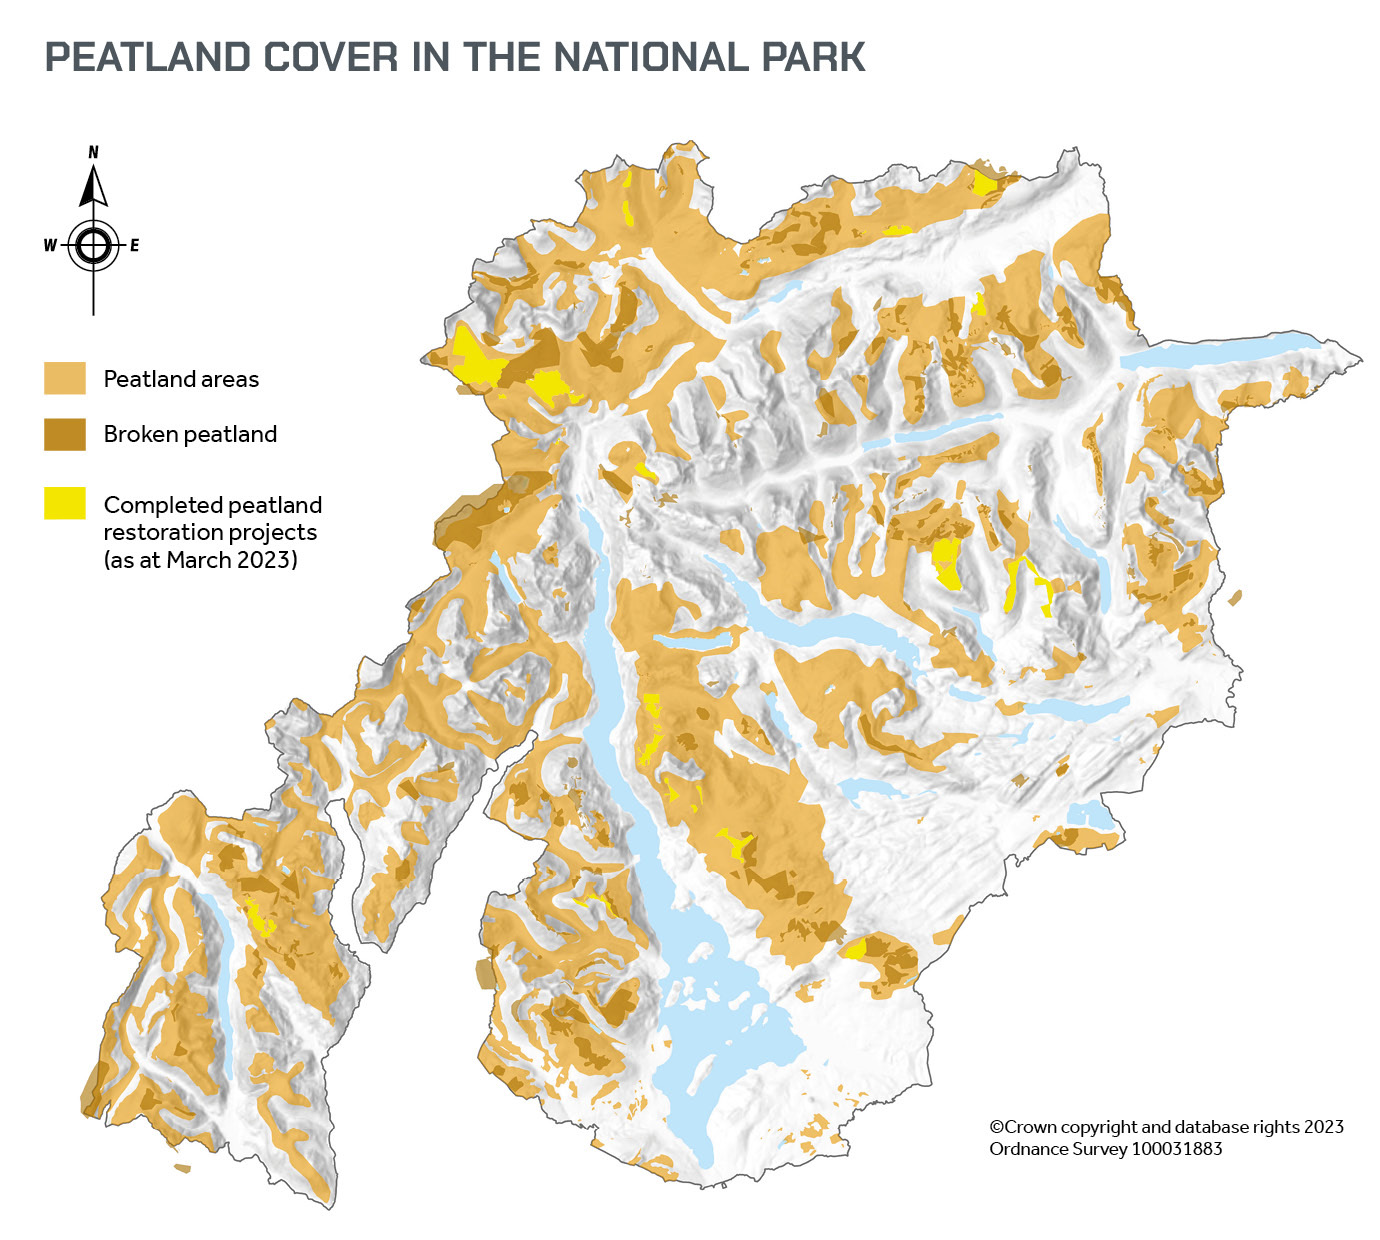 Map showing peatland cover in the National Park